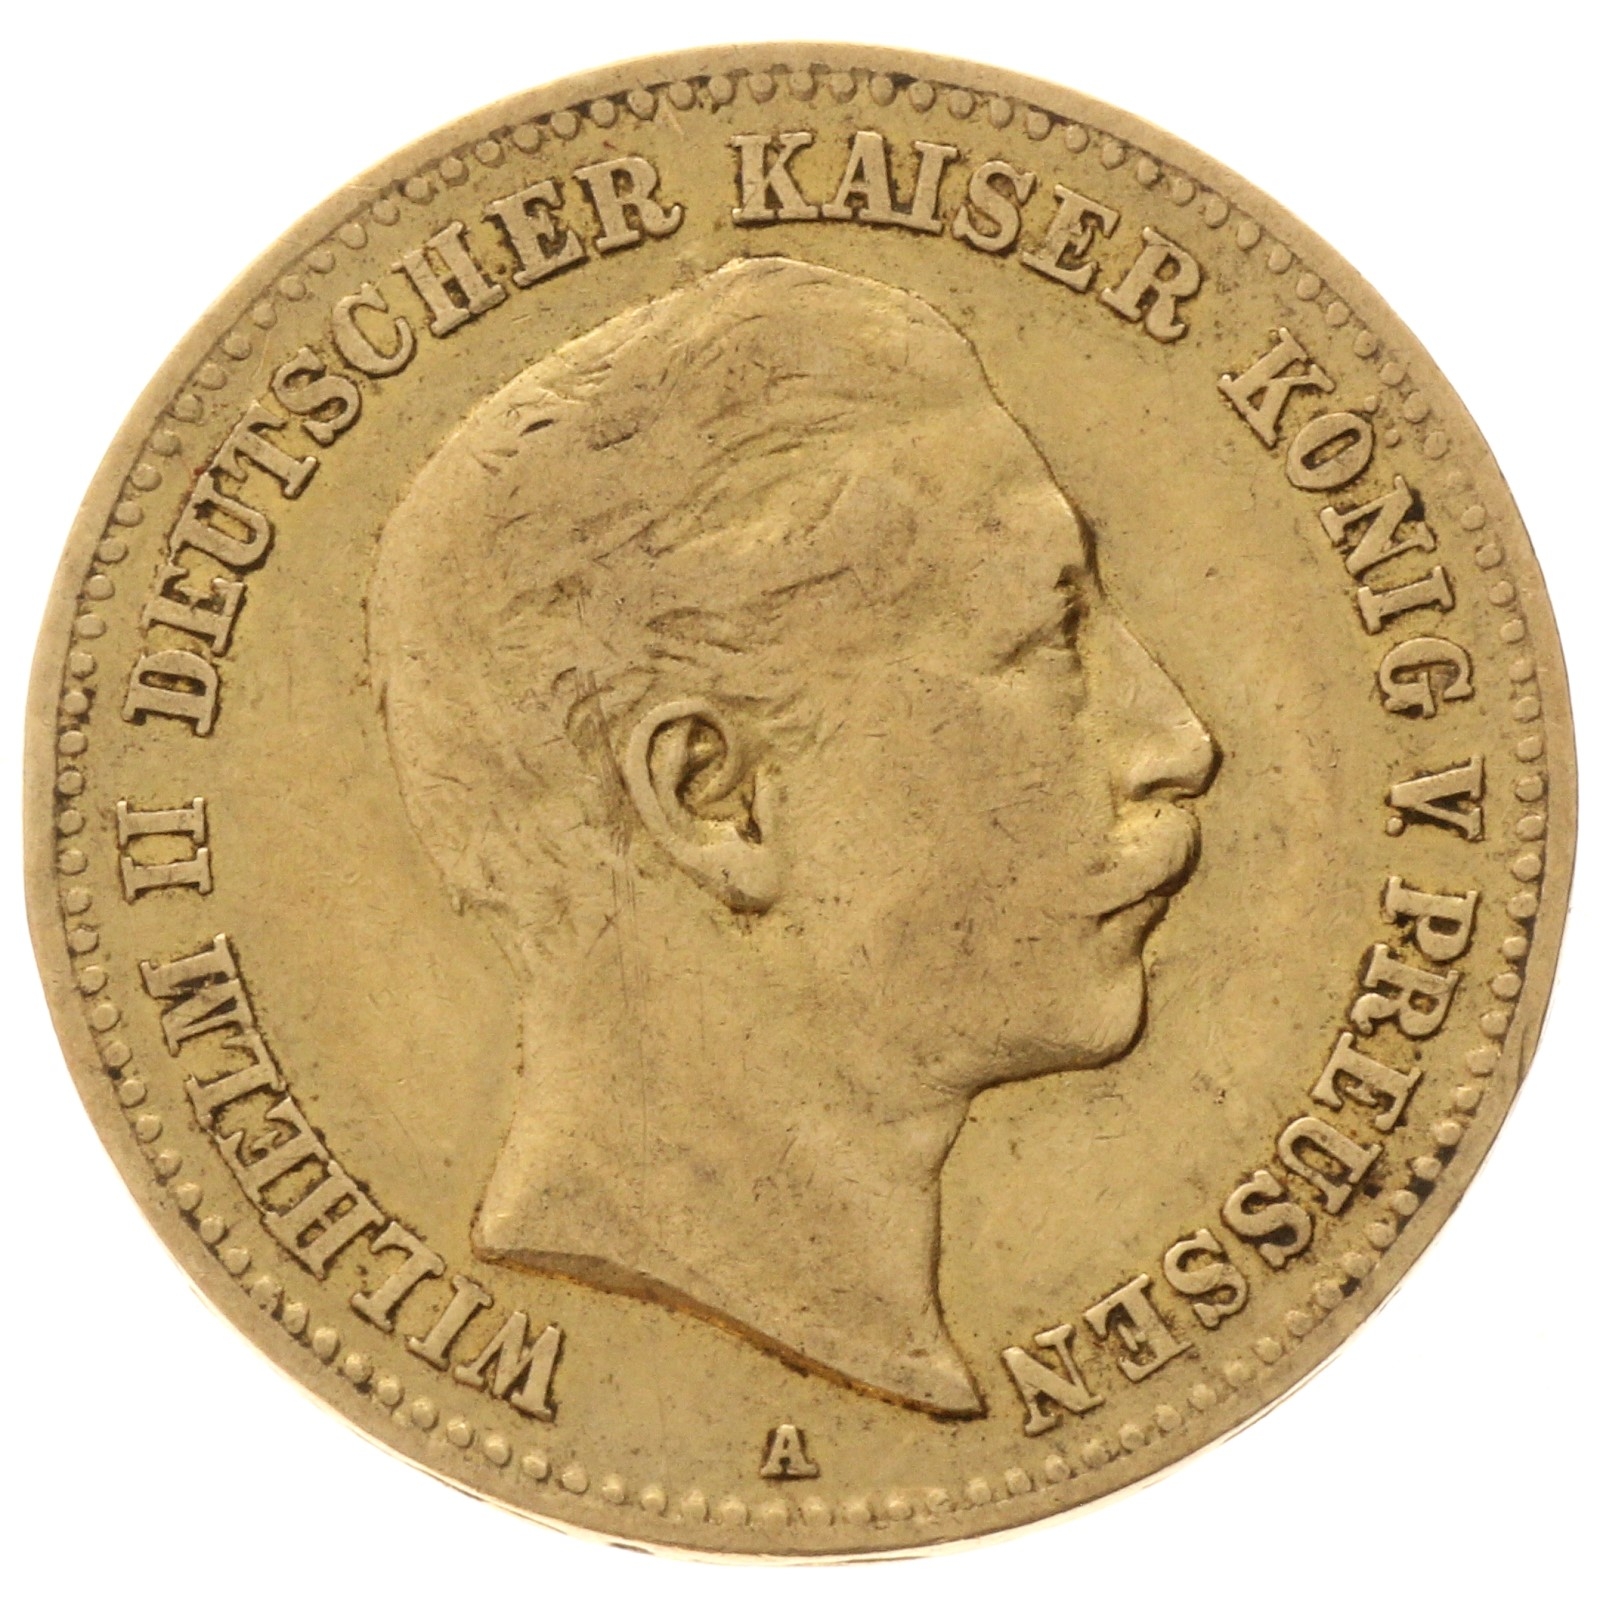 Germany - Prussia - 10 mark - 1898 - A 